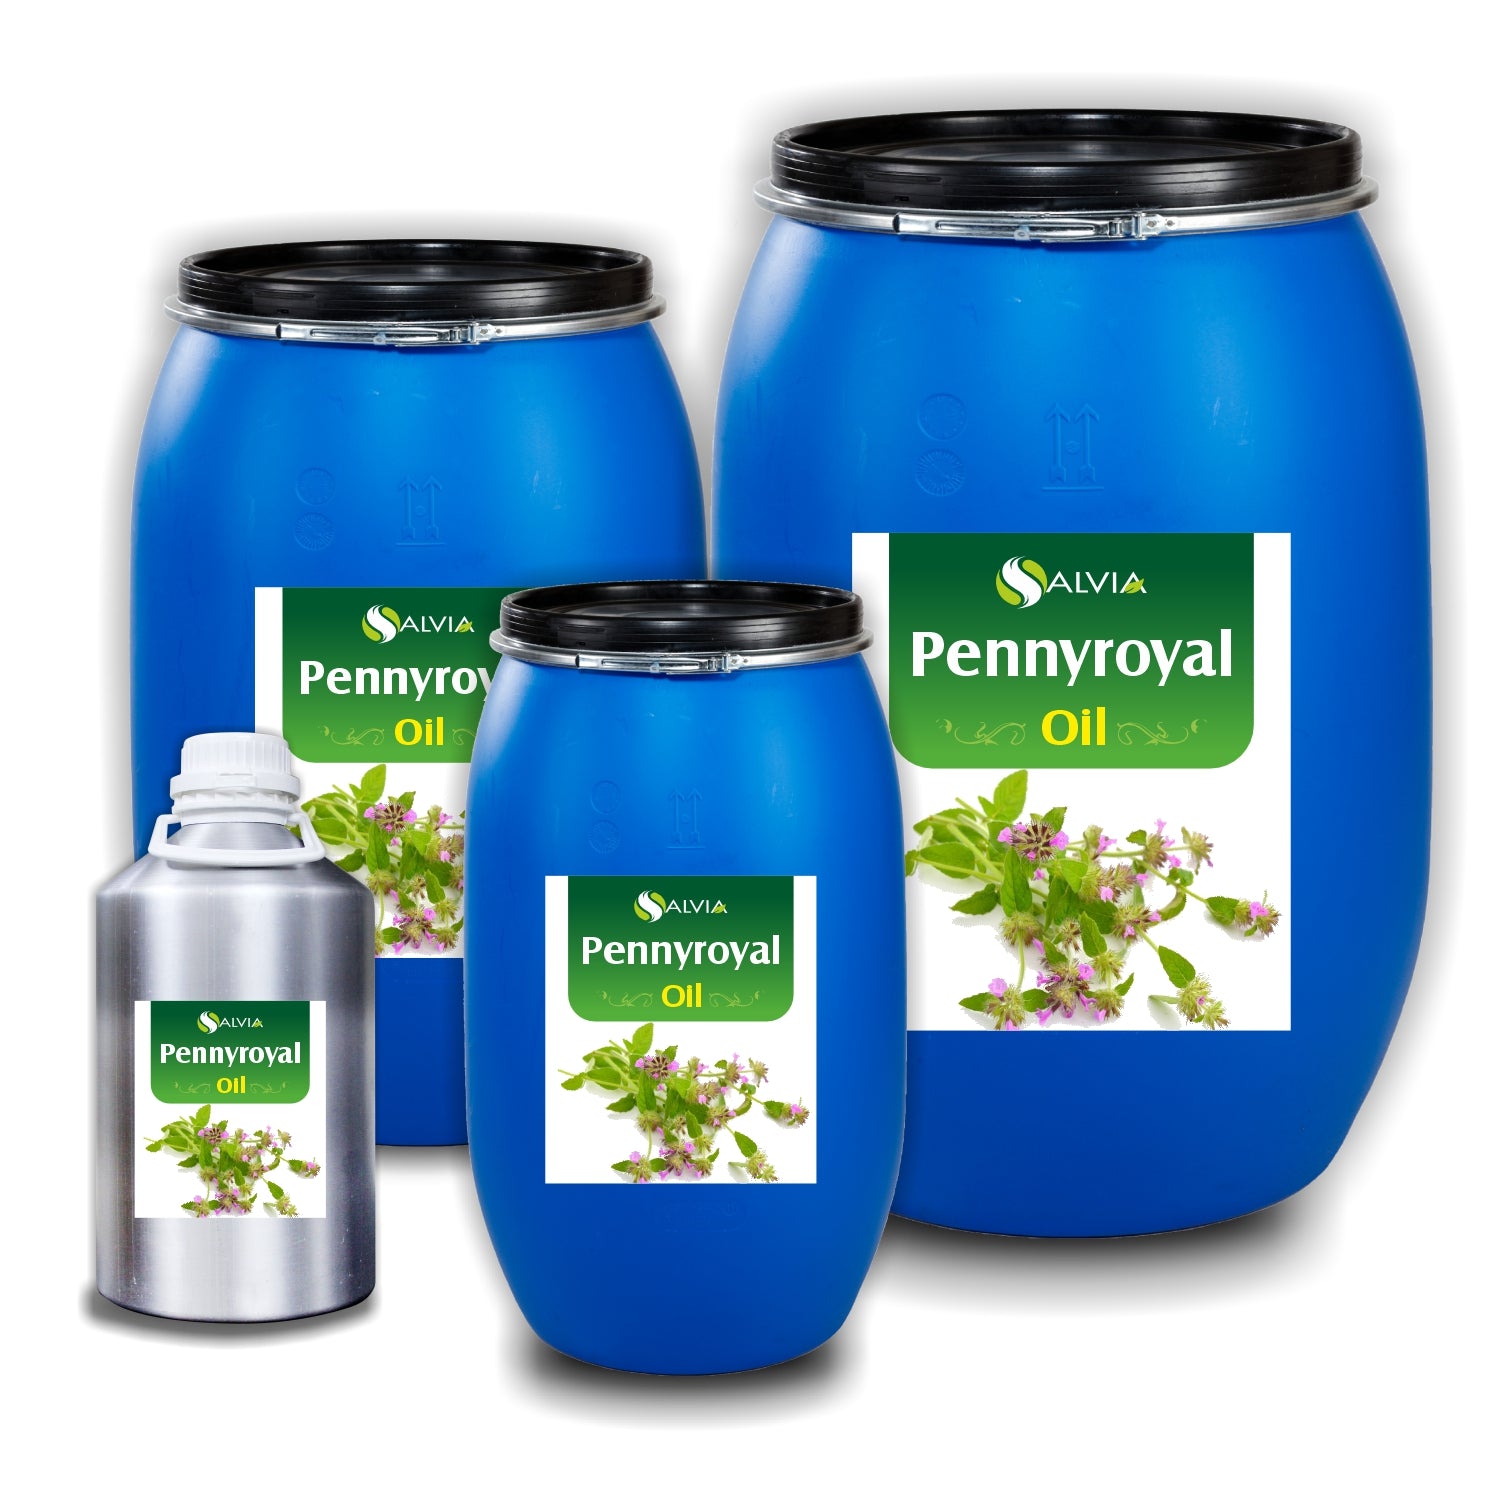 Salvia Natural Essential Oils 250ml Pennyroyal Oil (Mentha Pulegium) 100% Natural Pure Essential Oil Fights Germs, Soothes Skin Conditions, Insect Repellent